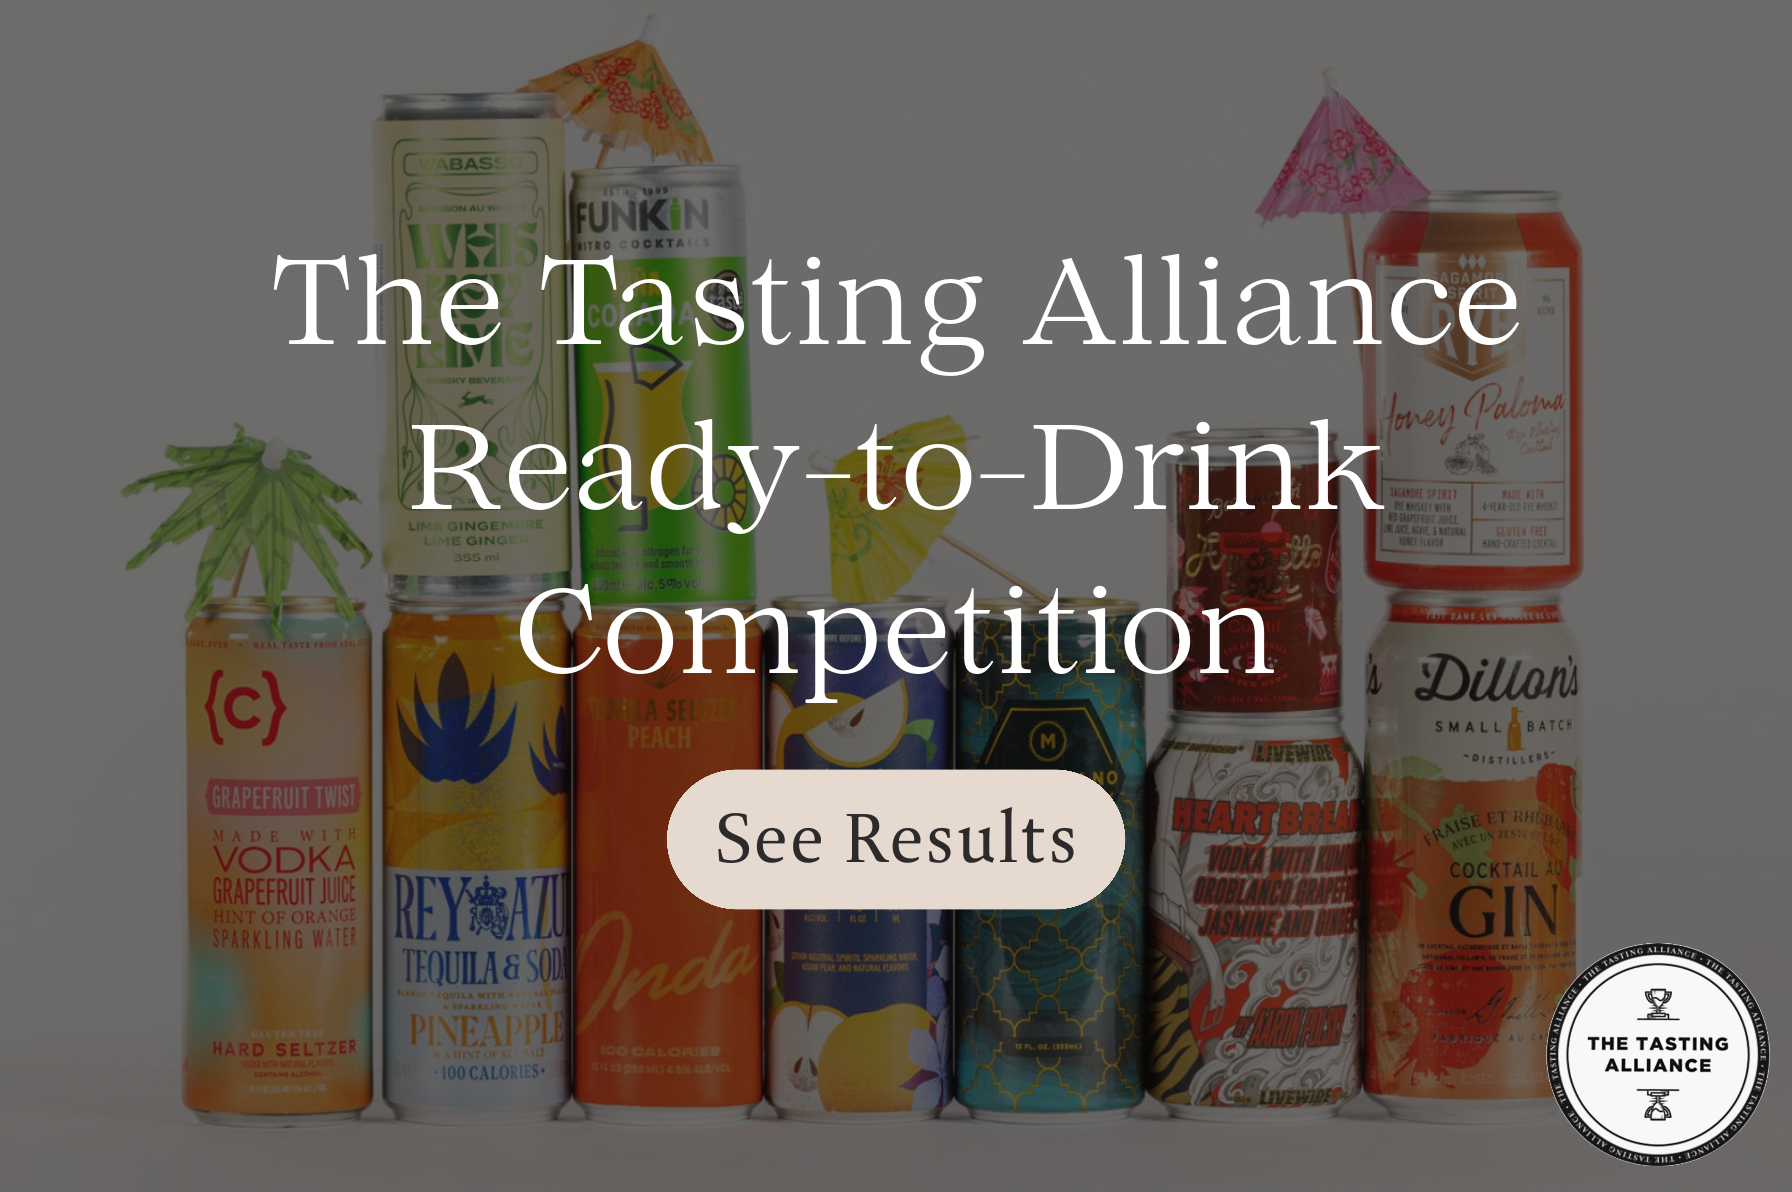 The results from The Tasting Alliance's Ready-to-Drink Competition